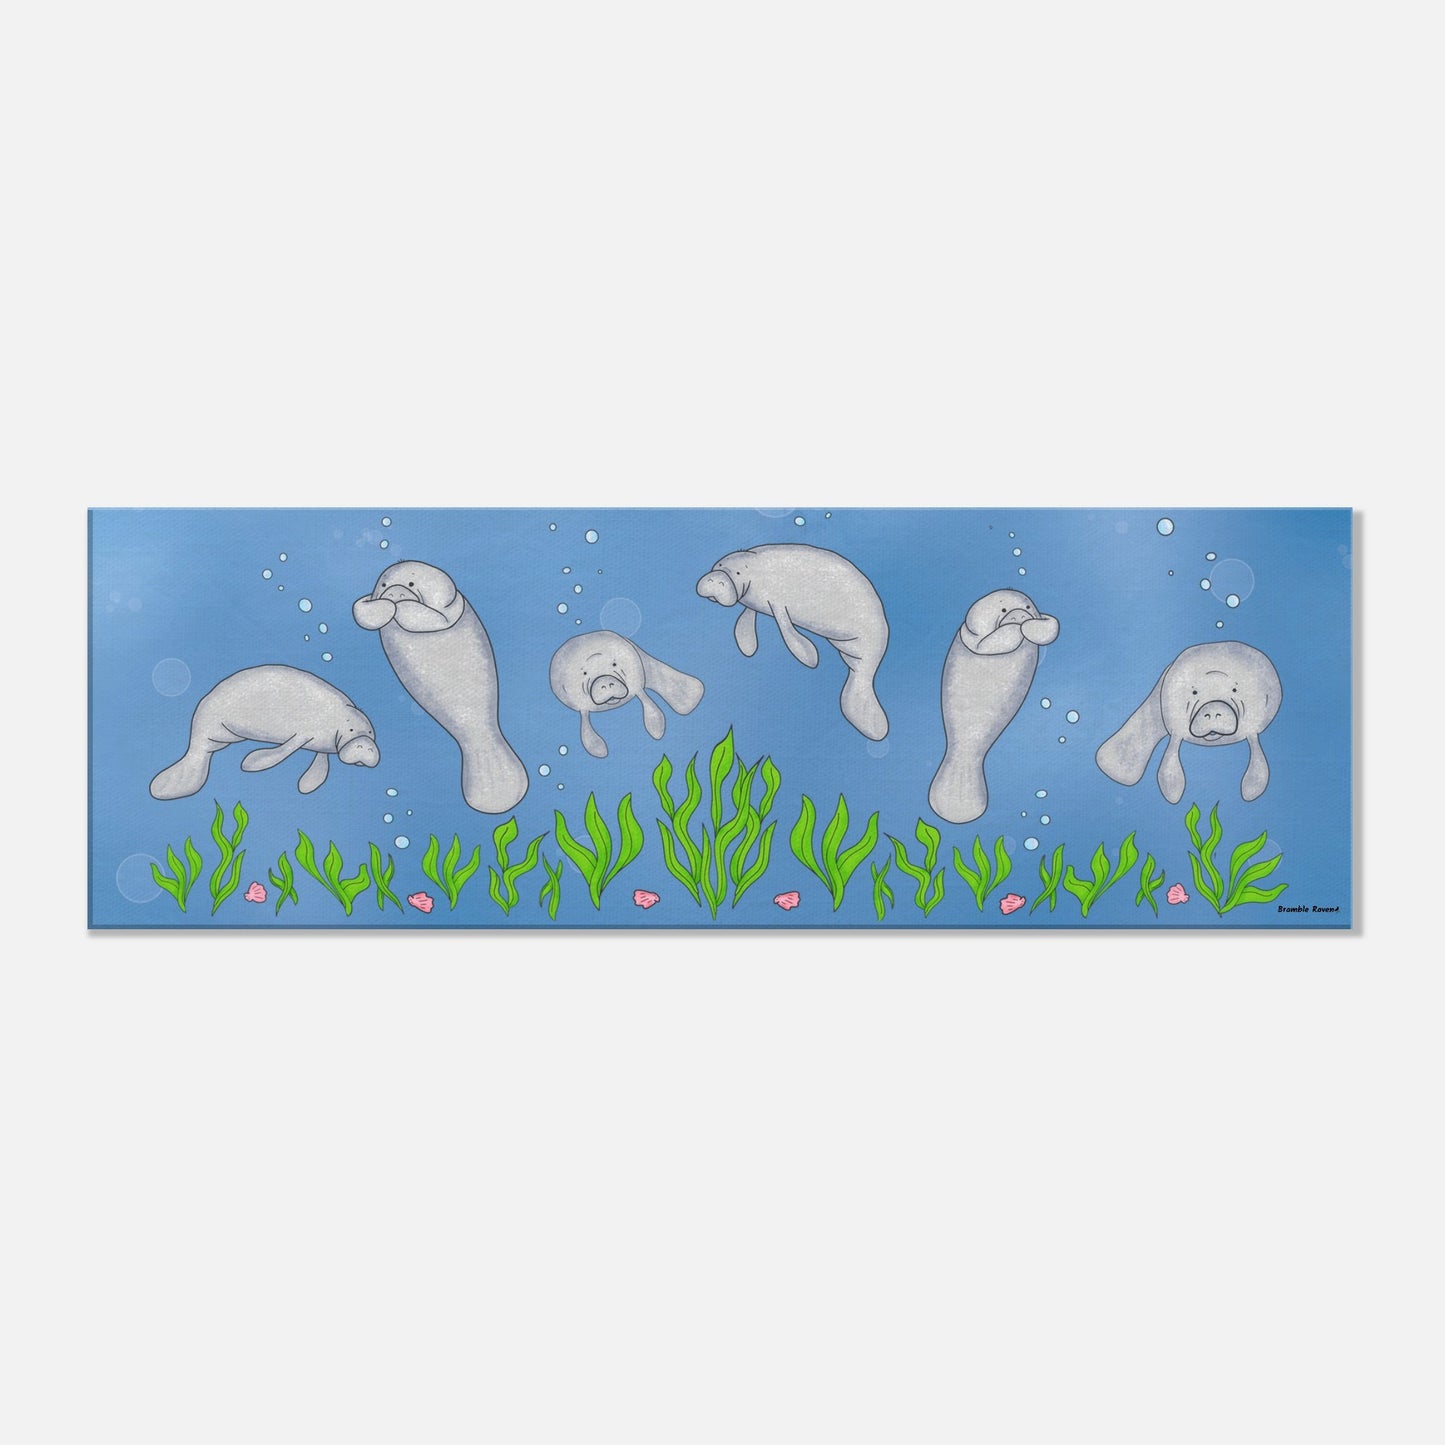 12 by 36 inch slim canvas wall art print featuring cute illustrated manatees swimming above the seabed. Hanging hardware included.